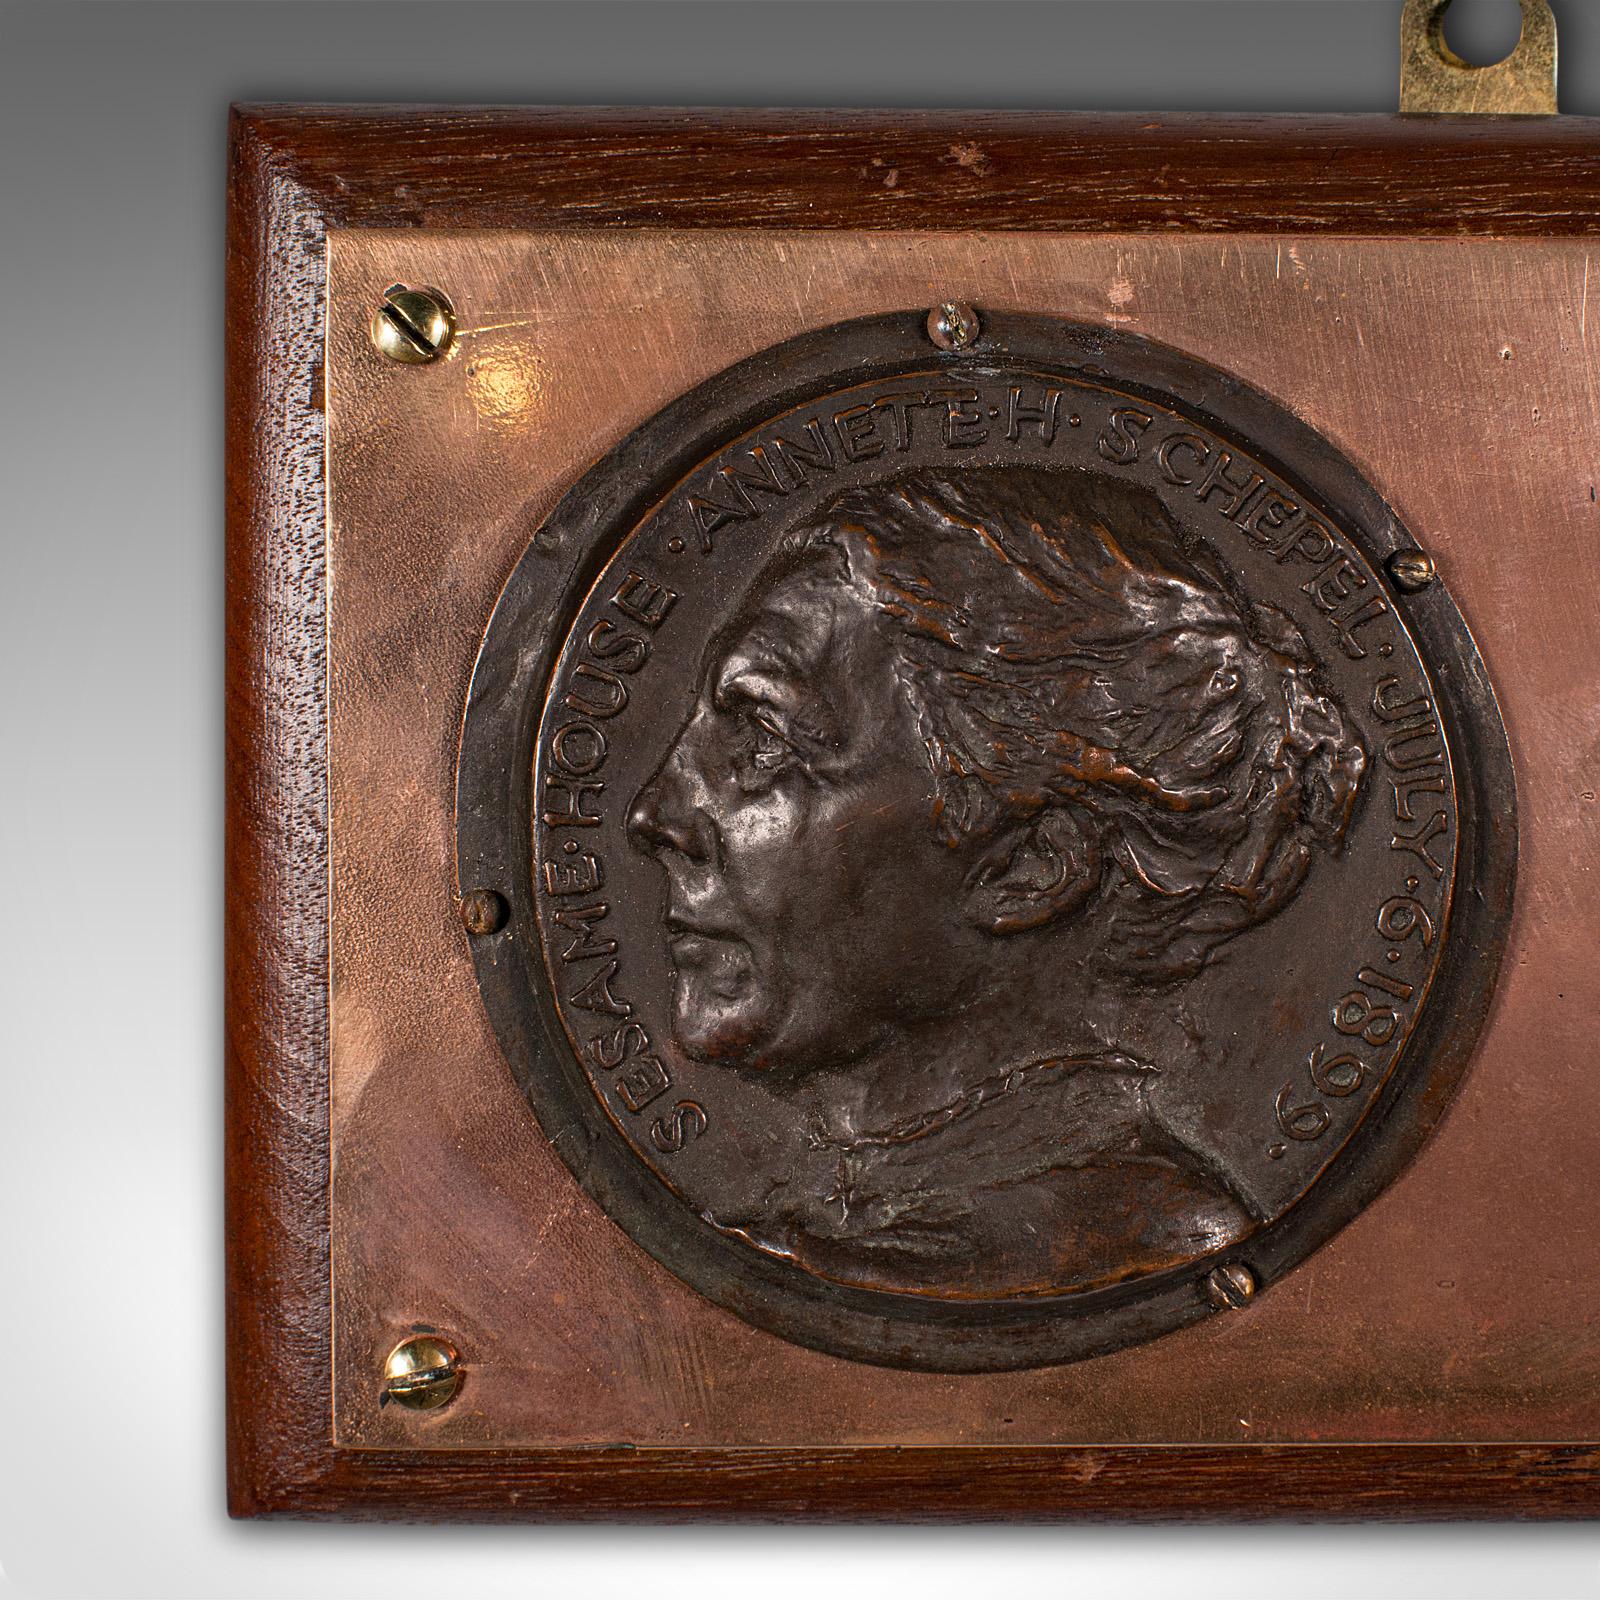 Antique Mounted Portrait Plaque, English, Bronze, Decor, Wall Panel, Victorian In Good Condition For Sale In Hele, Devon, GB